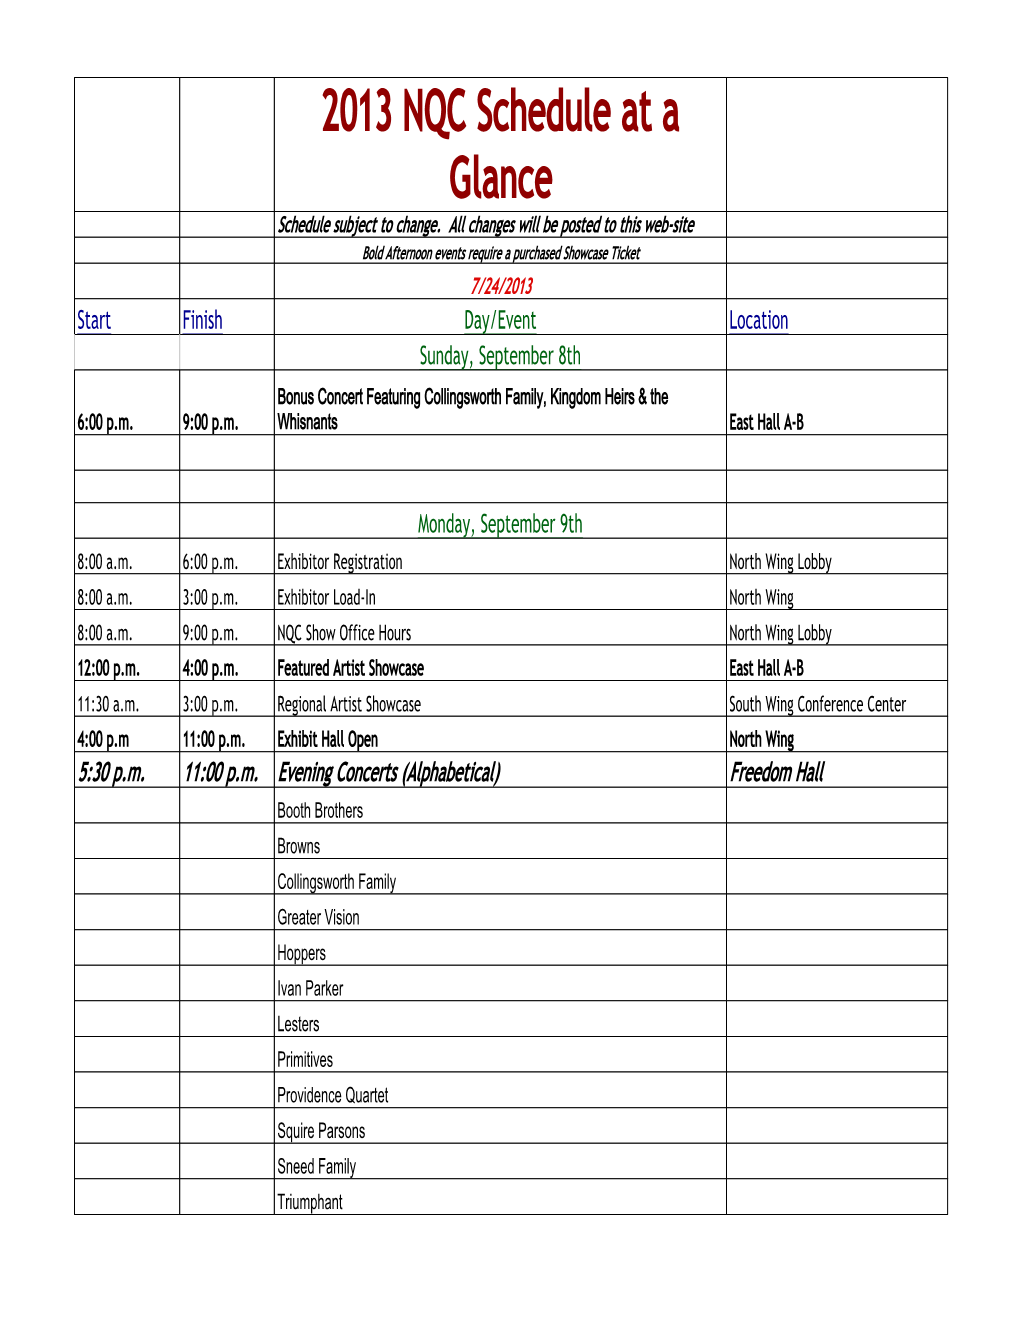 2013 NQC Schedule at a Glance Schedule Subject to Change